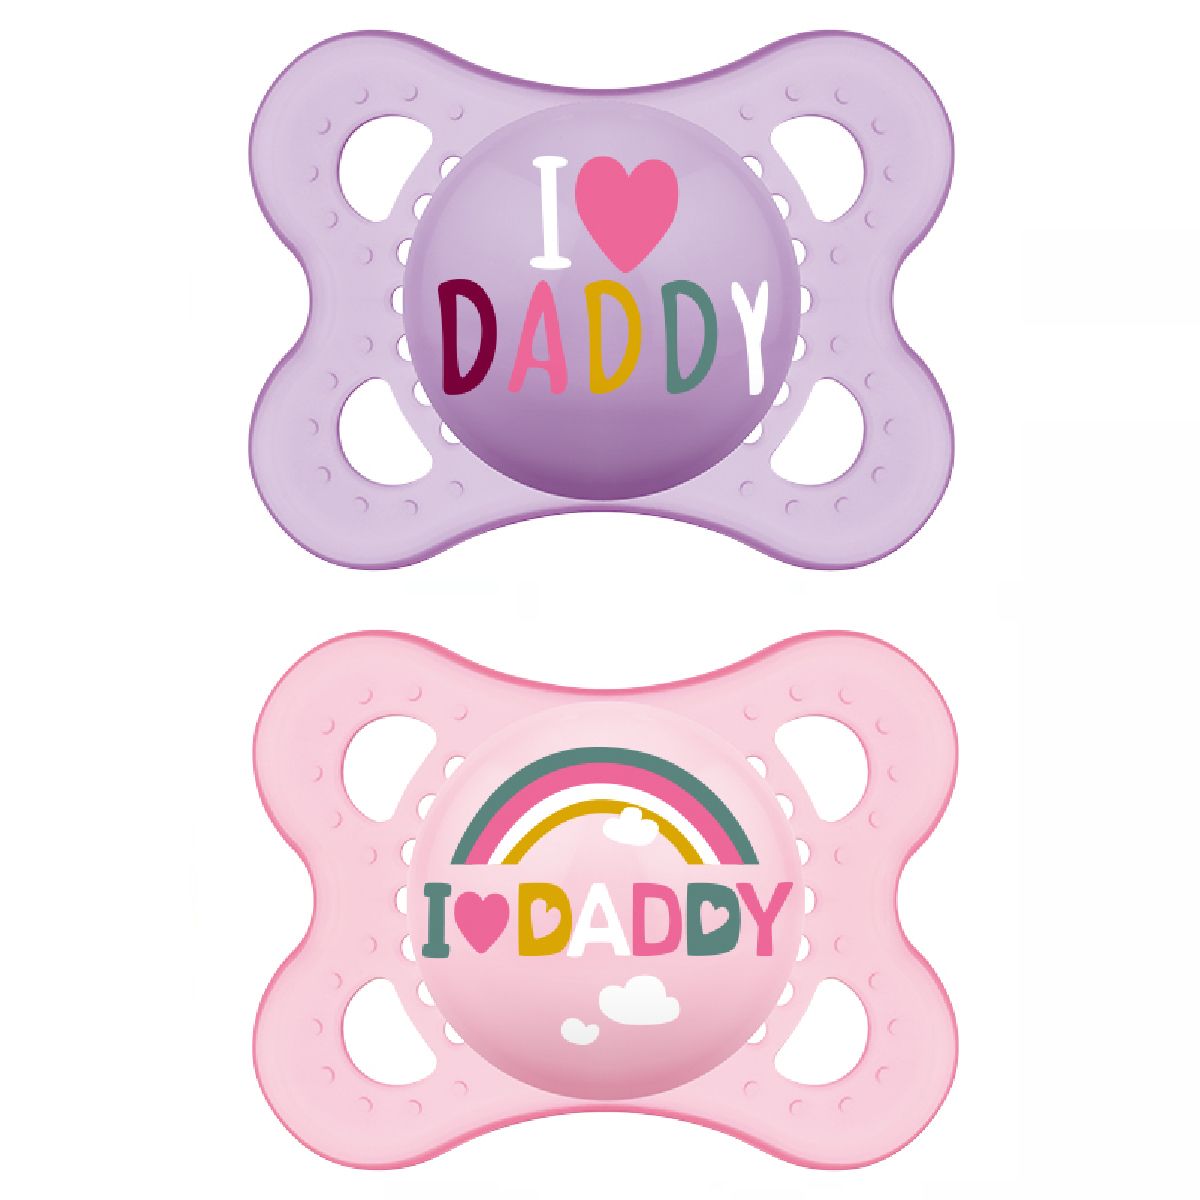 MAM Original Love Daddy - Soother